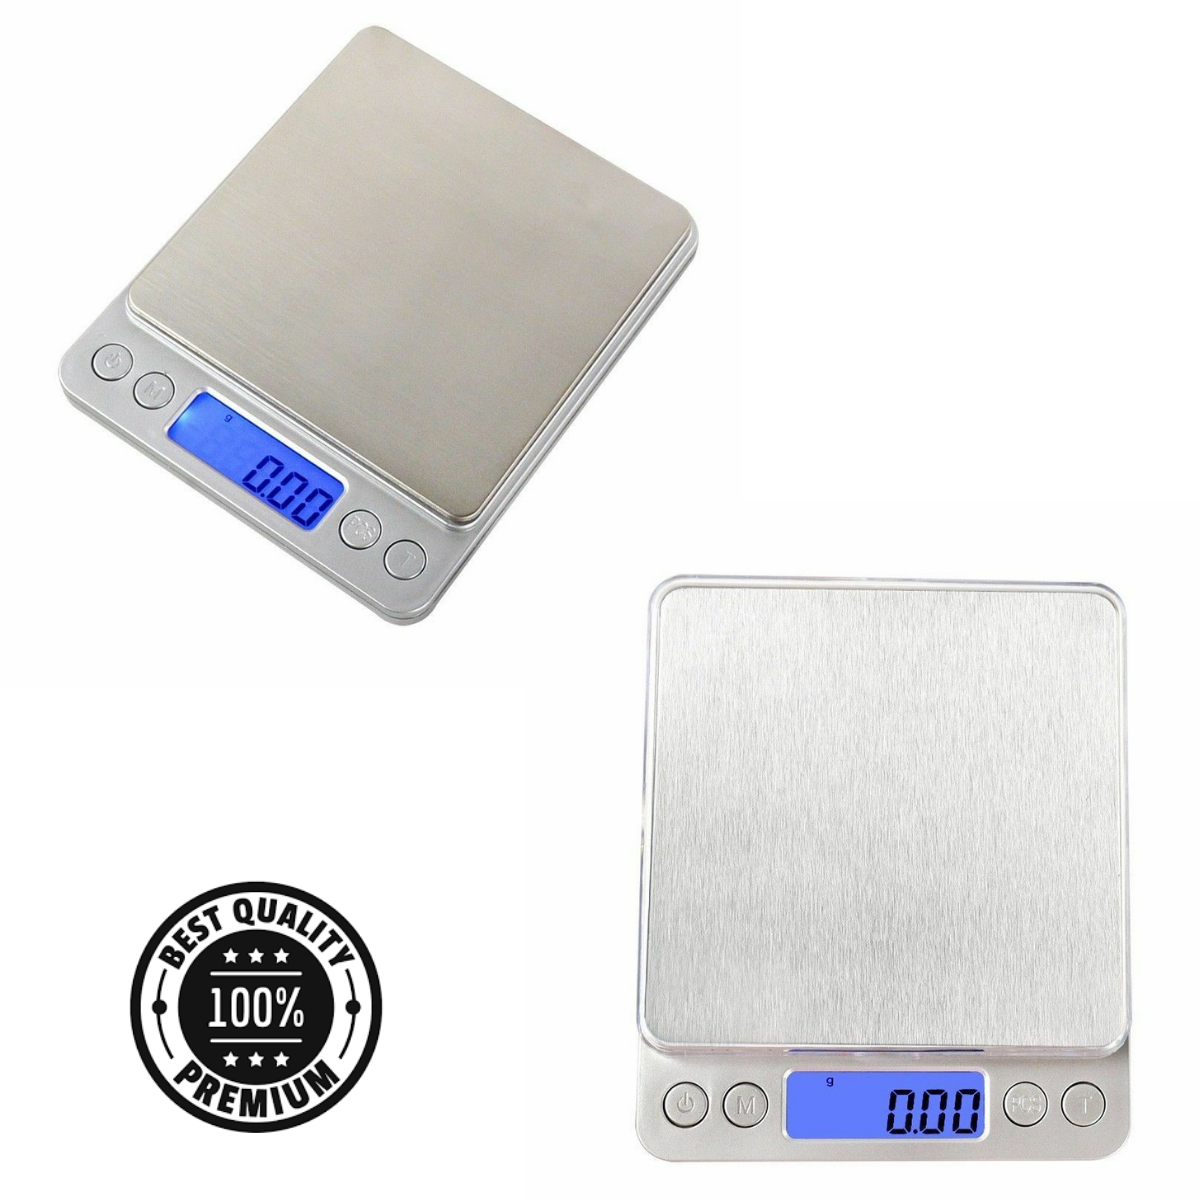 LCD Electronic 3KG/0.1g Kitchen Food Scale Digital Balance Weight Postal Scales